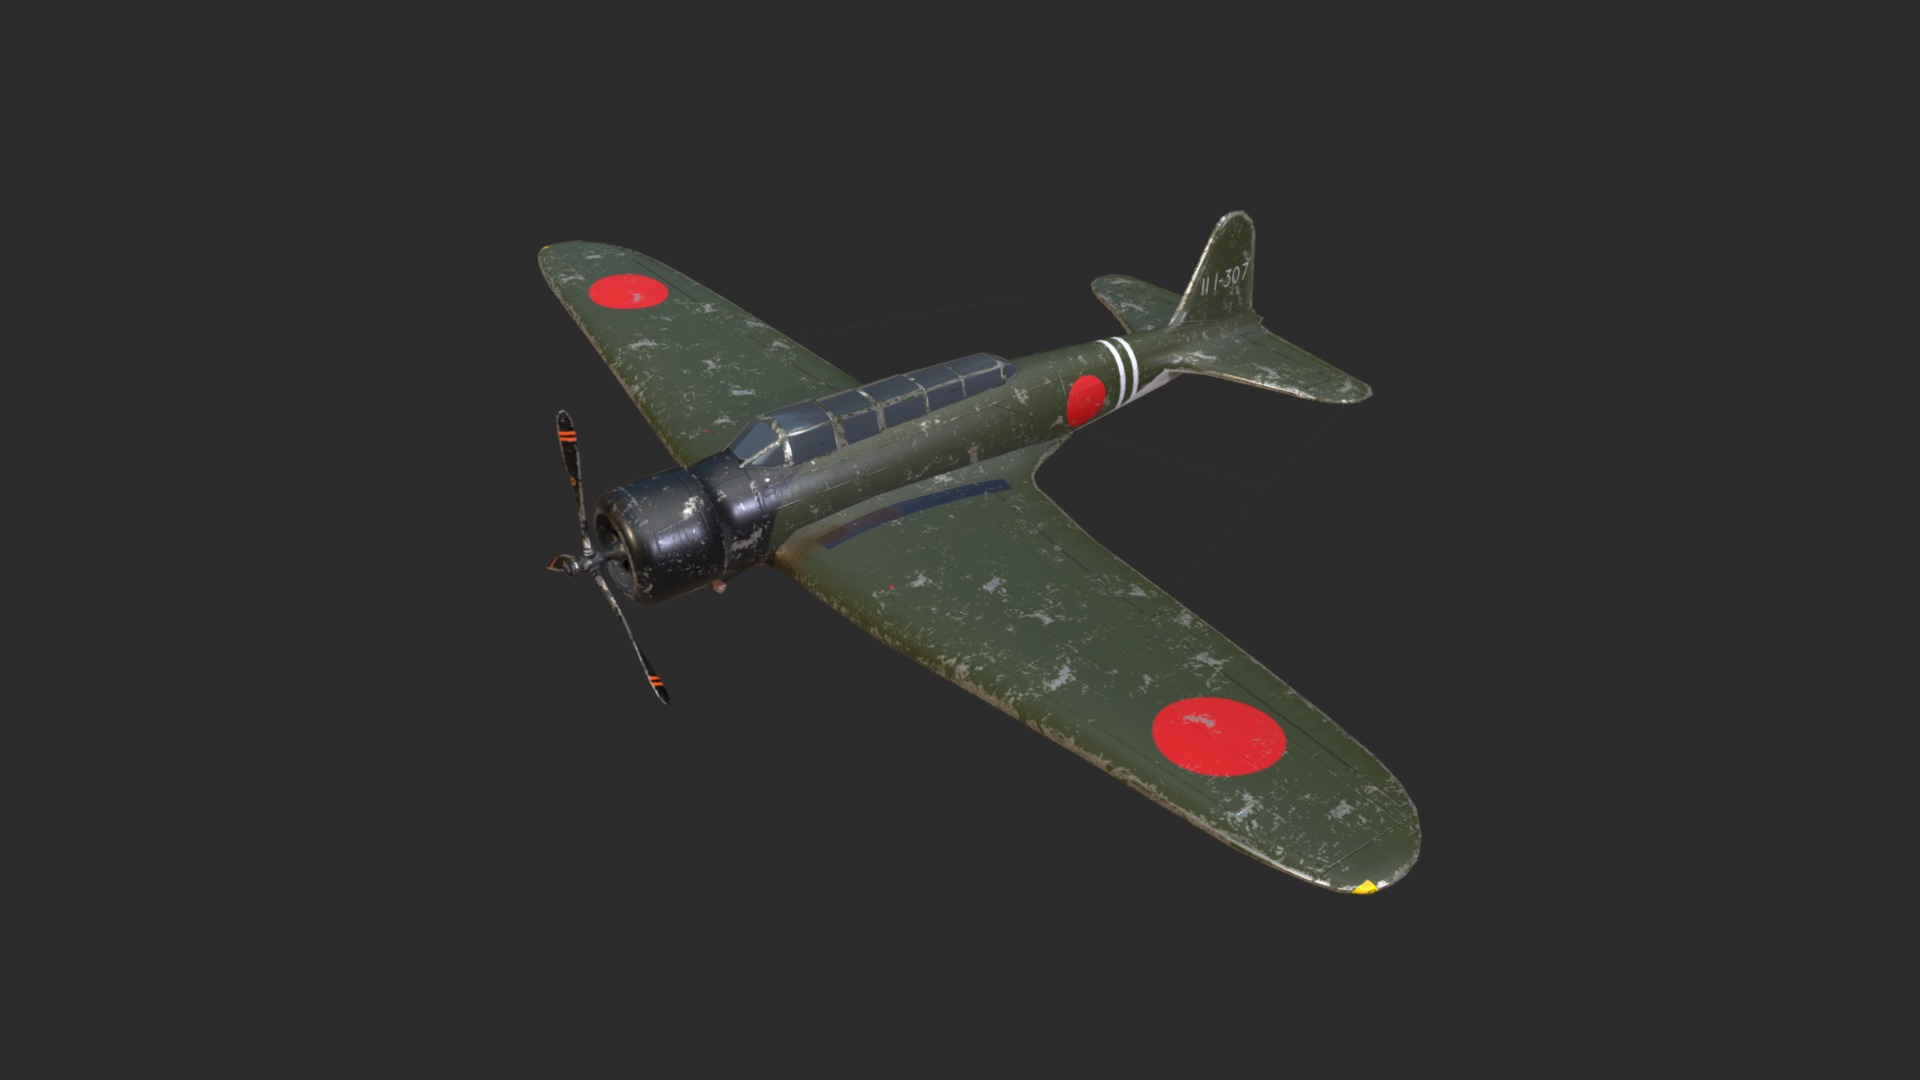 3D model Nakajima B5N2 Kate (Coral Sea 1942) - This is a 3D model of the Nakajima B5N2 Kate (Coral Sea 1942). The 3D model is about a green and red toy airplane.